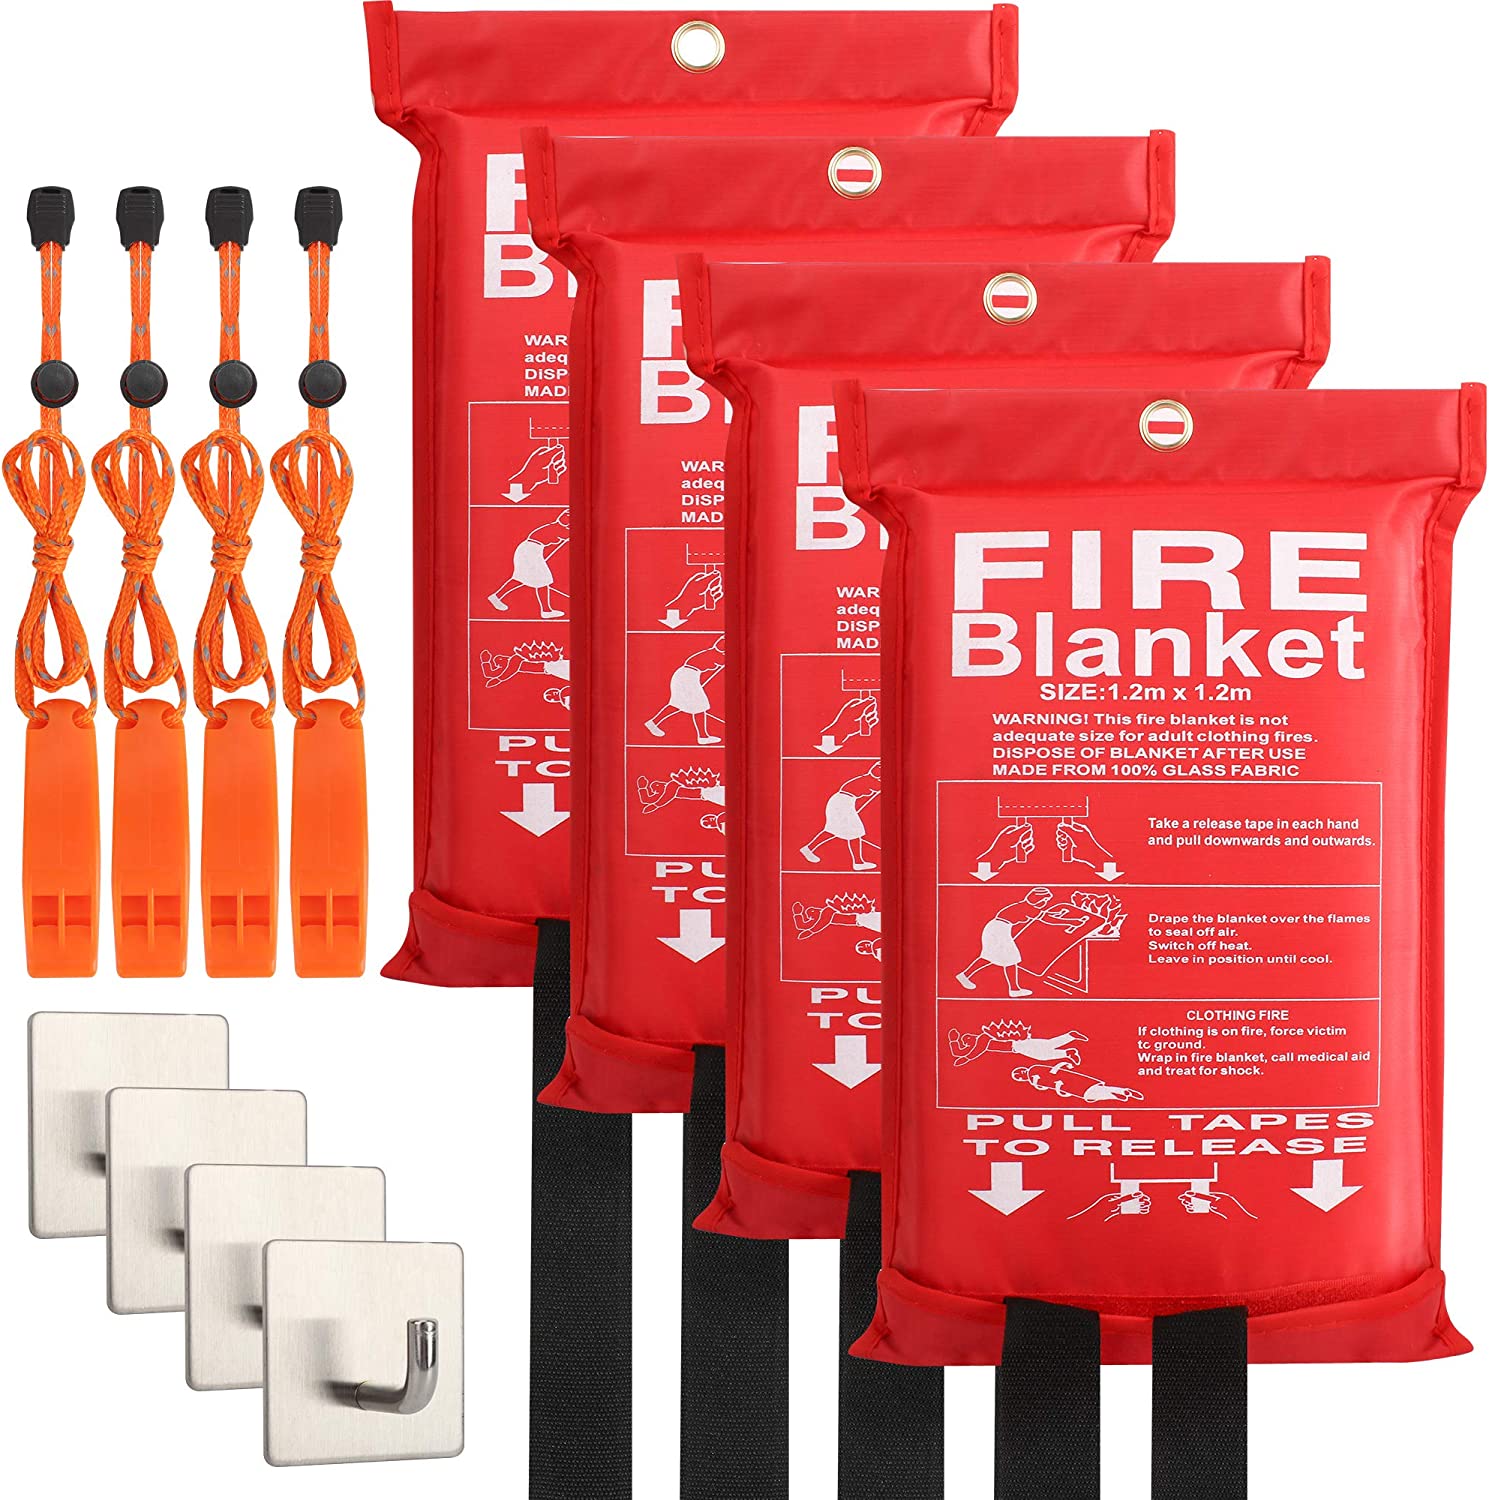 4-Pack Fire Blanket – X-Large Fiberglass Fire Blanket Fire Suppression Blanket – Fire Blankets Emergency for People – Fire Safety Blanket with Emergency Whistles – Fireblanket for Kitchen, Home